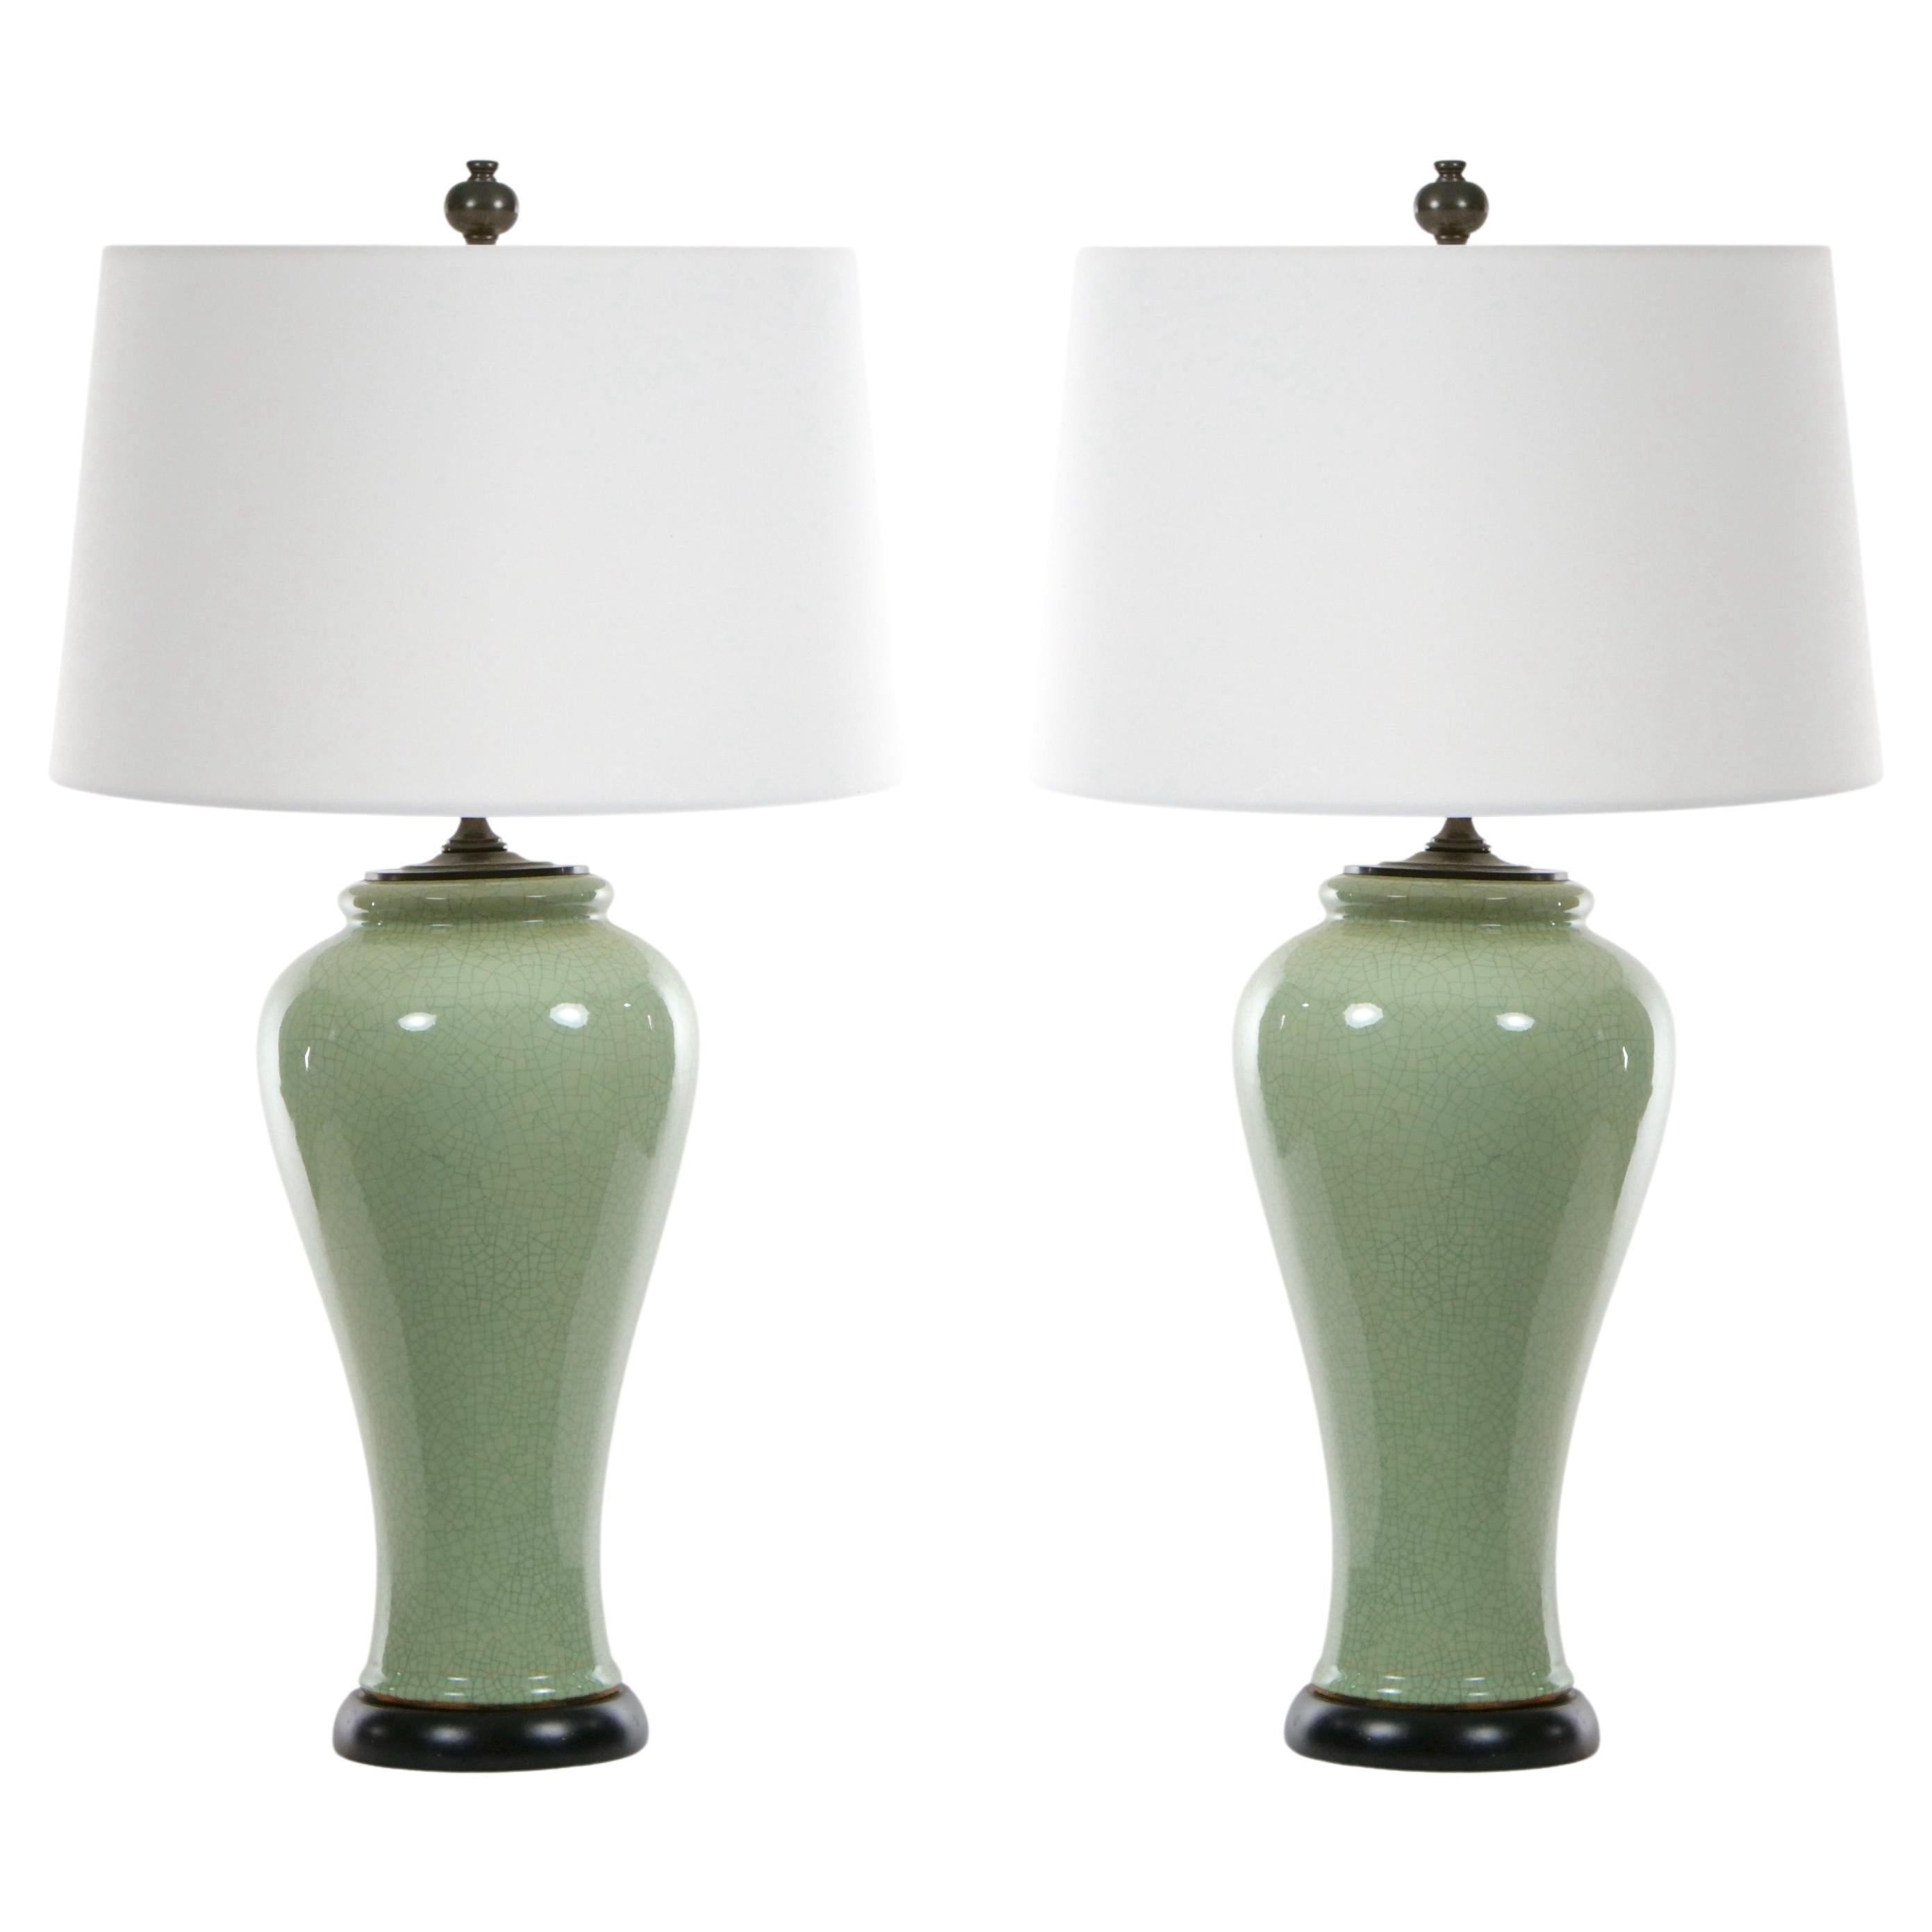  Chinese Pair Celadon Crackle Porcelain Table Lamp